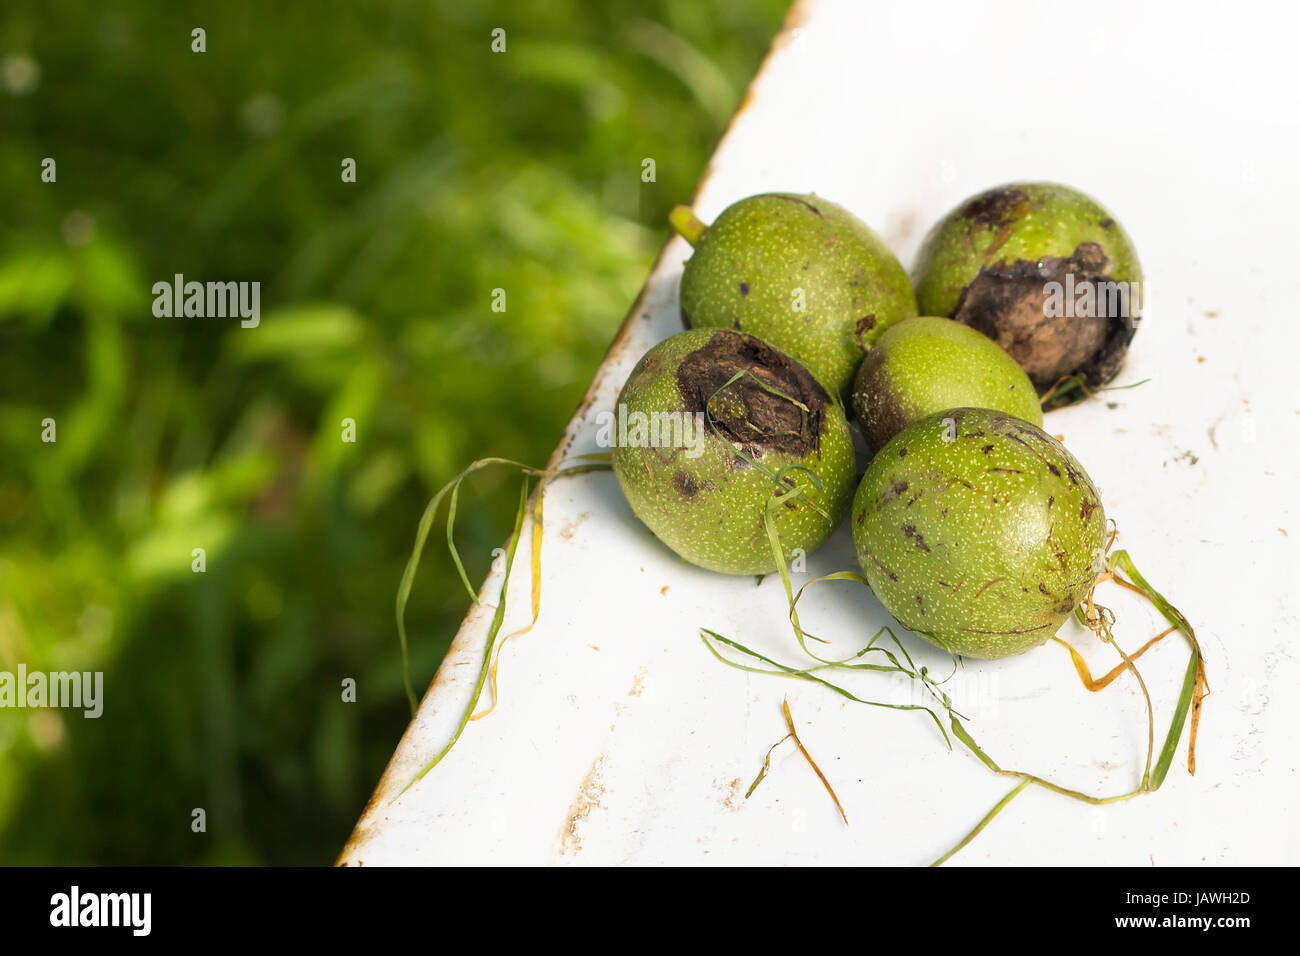 Green walnuts that have been knocked off the branches Stock Photo